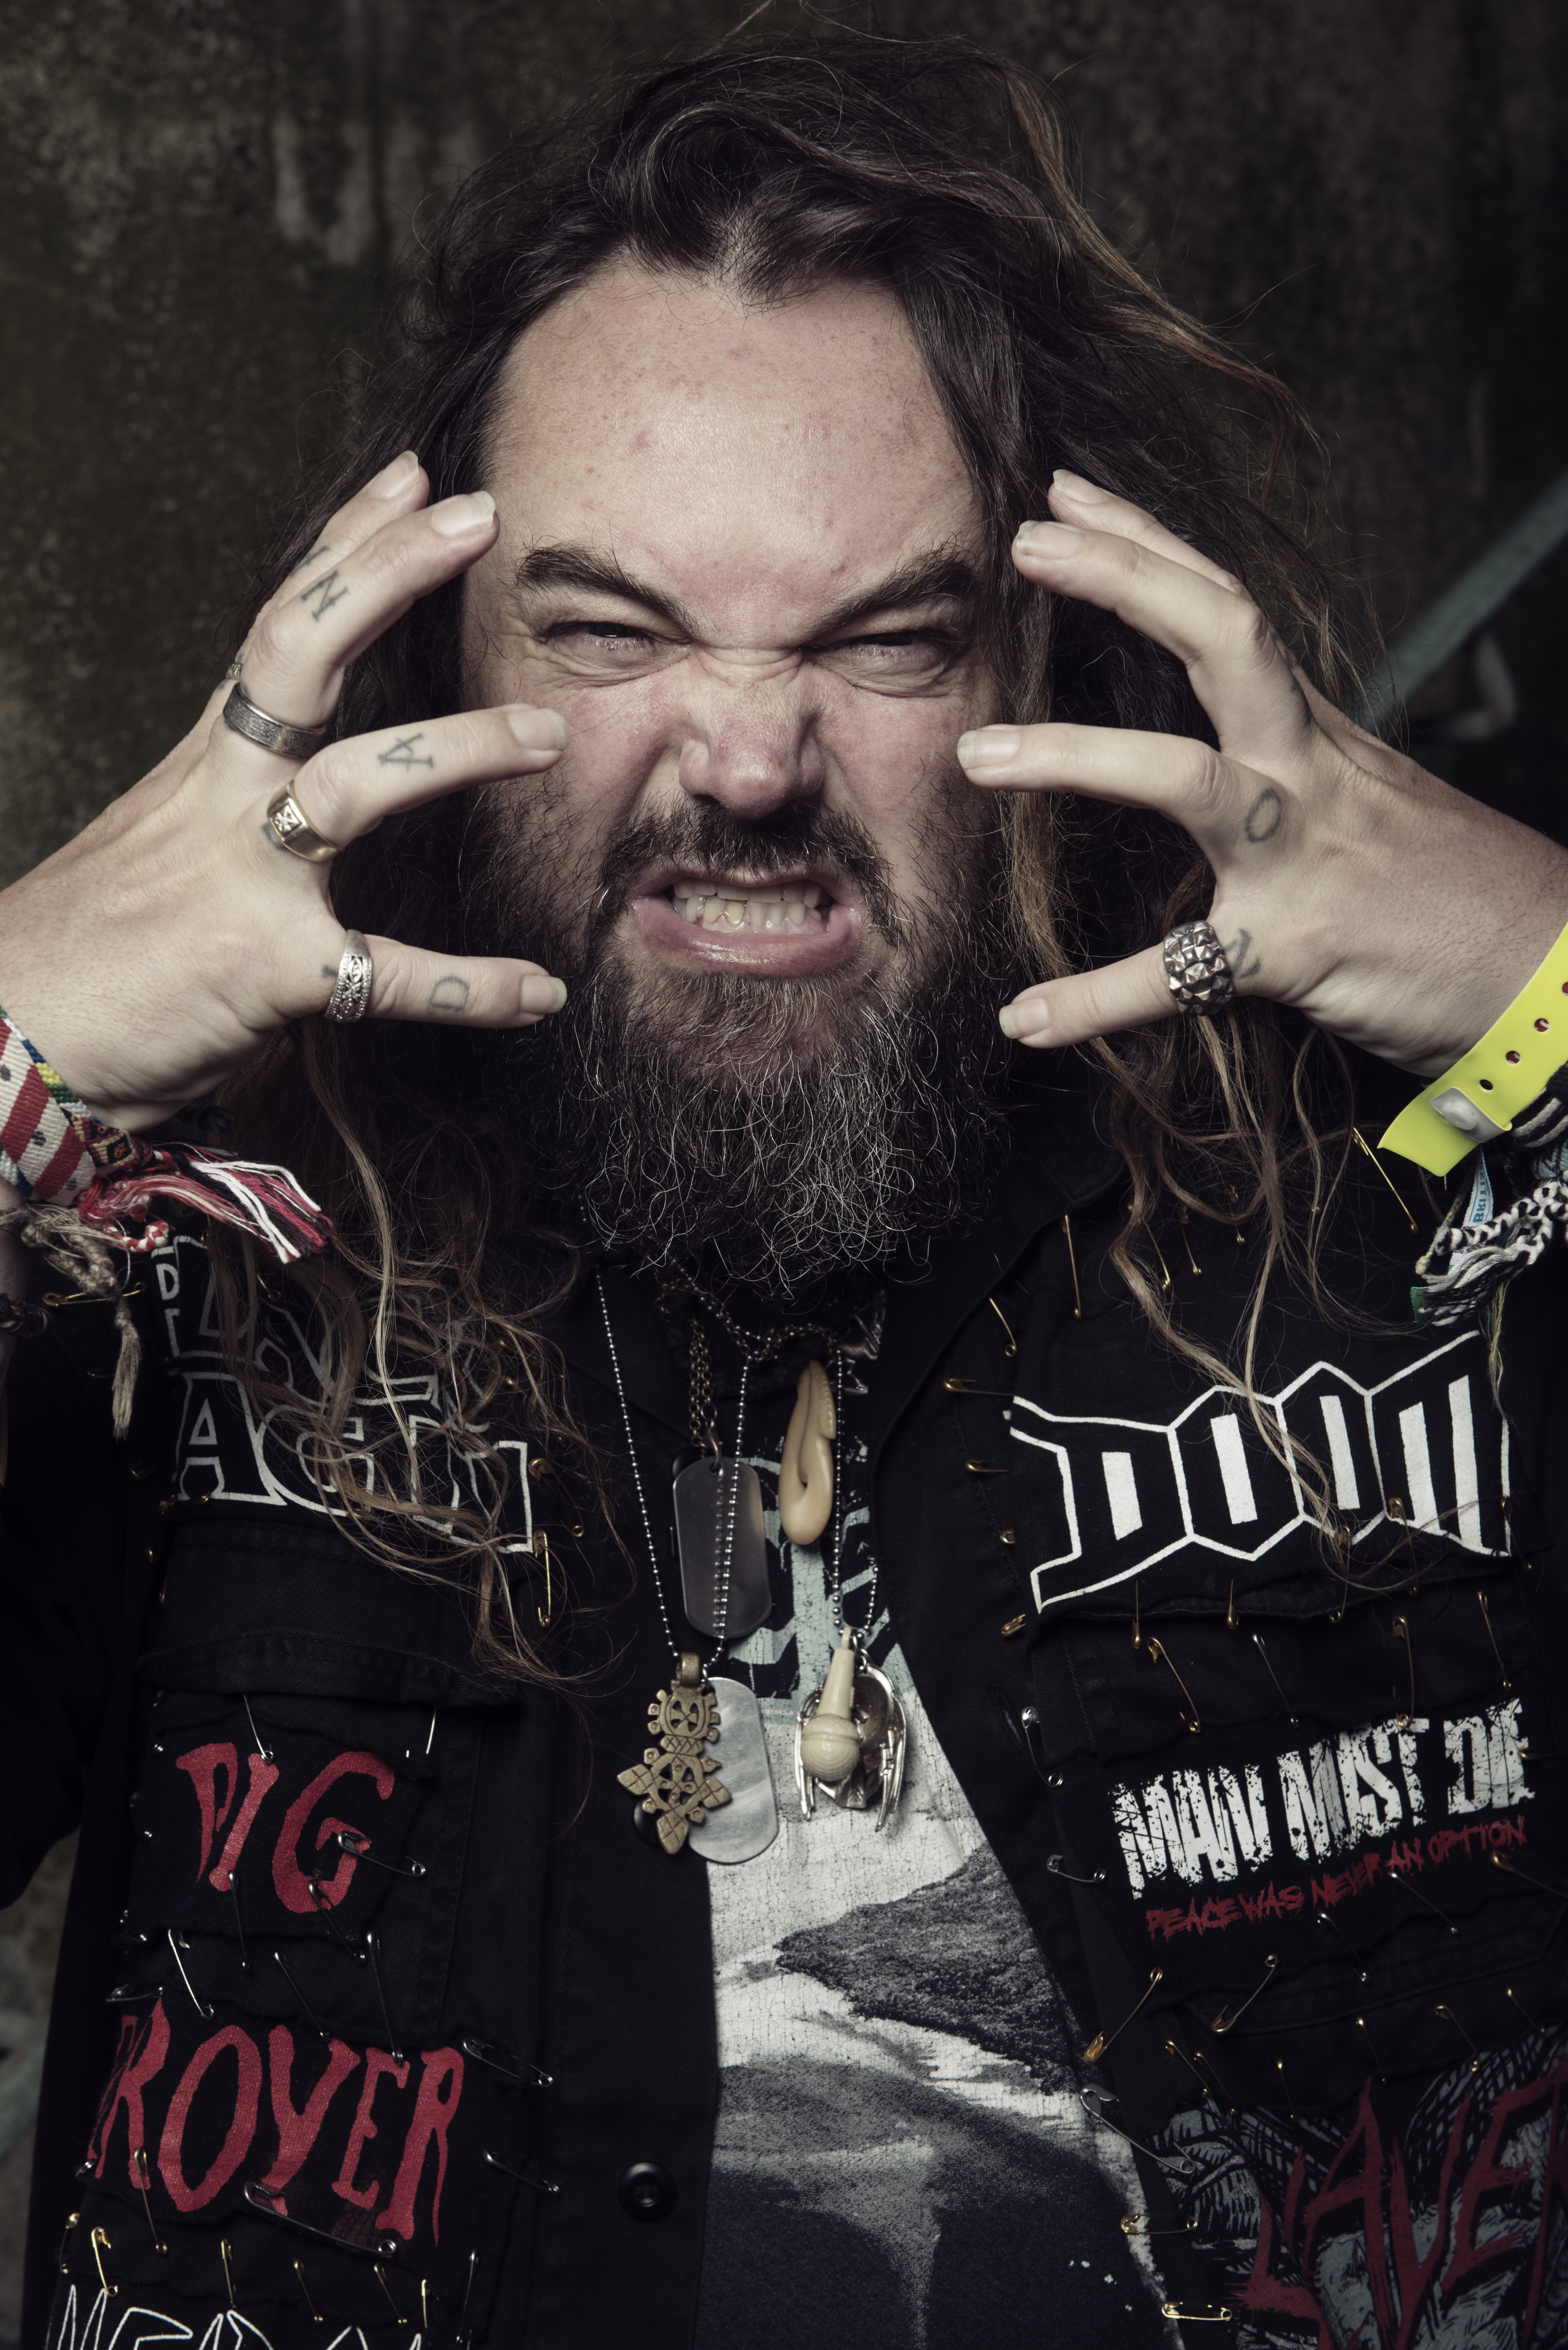 Cavalera Conspiracy - discography, line-up, biography, interviews